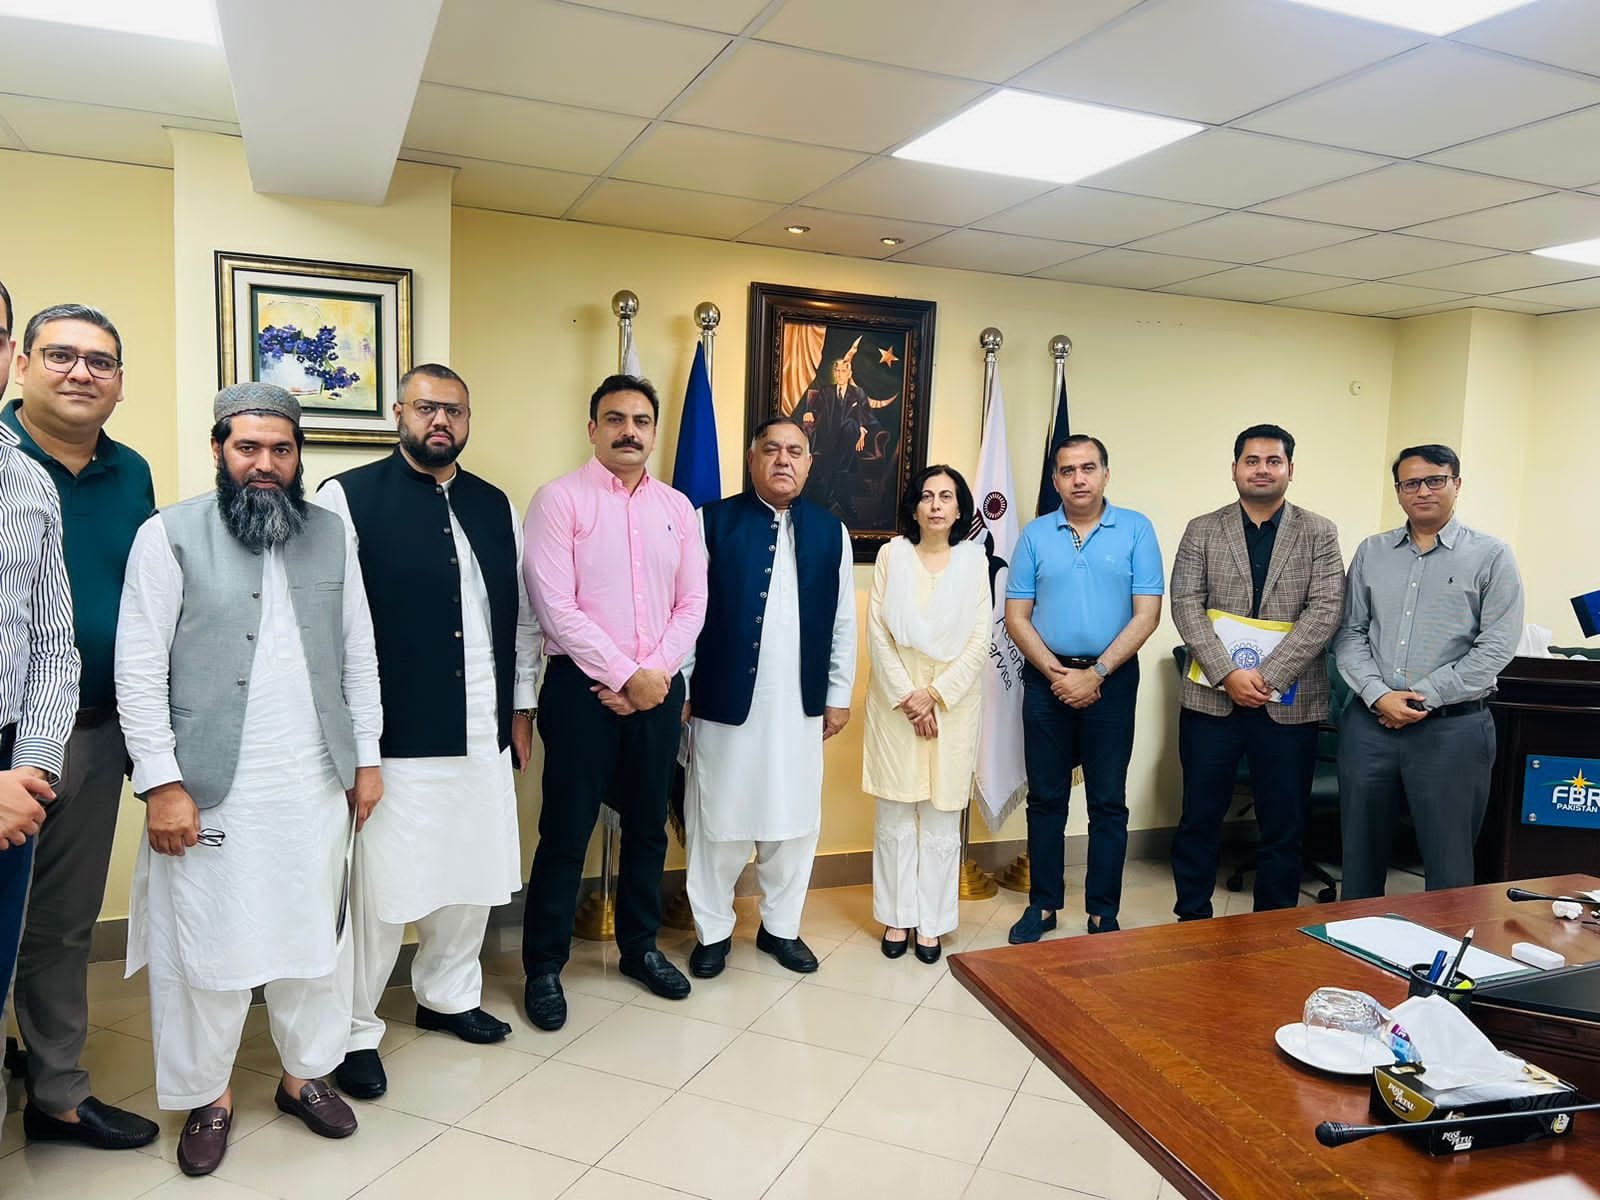 GCCI's delegation visited Member Customs Policy FBR Office.